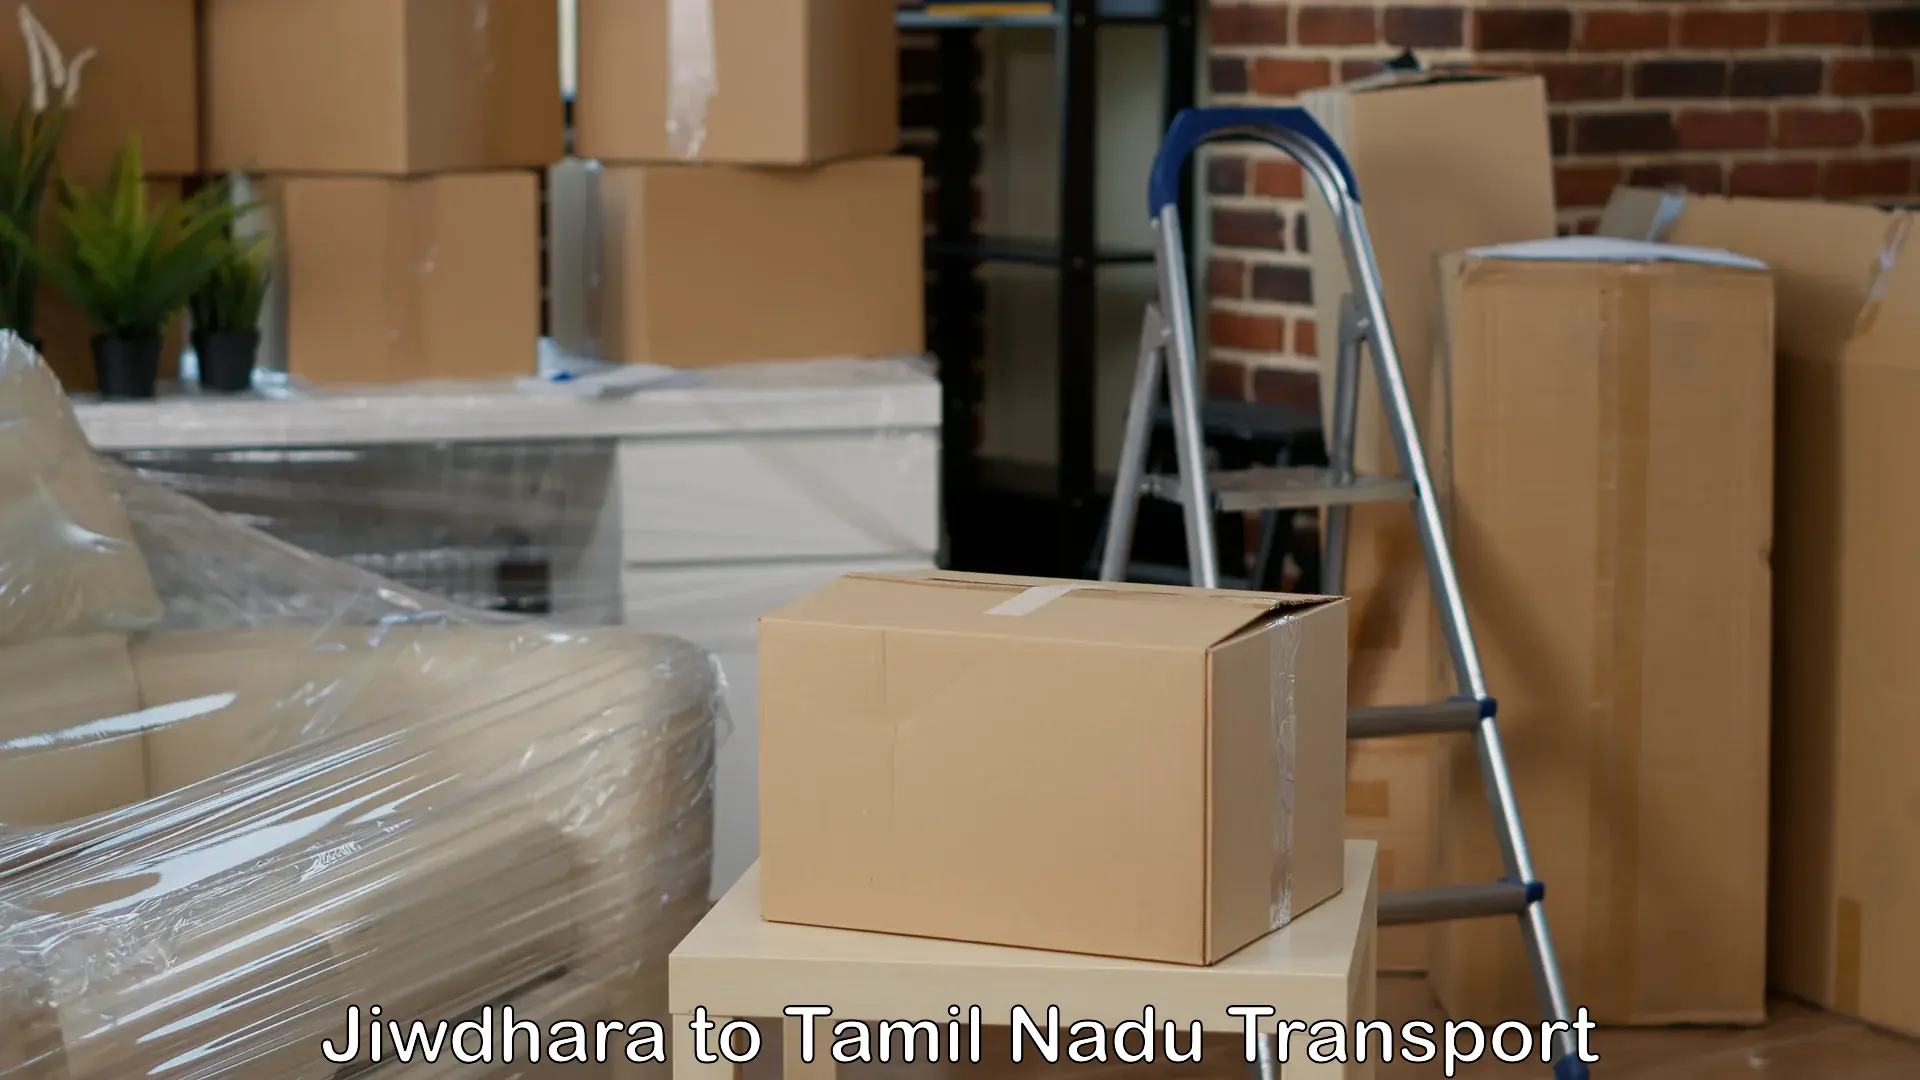 Domestic goods transportation services Jiwdhara to SRM Institute of Science and Technology Chennai